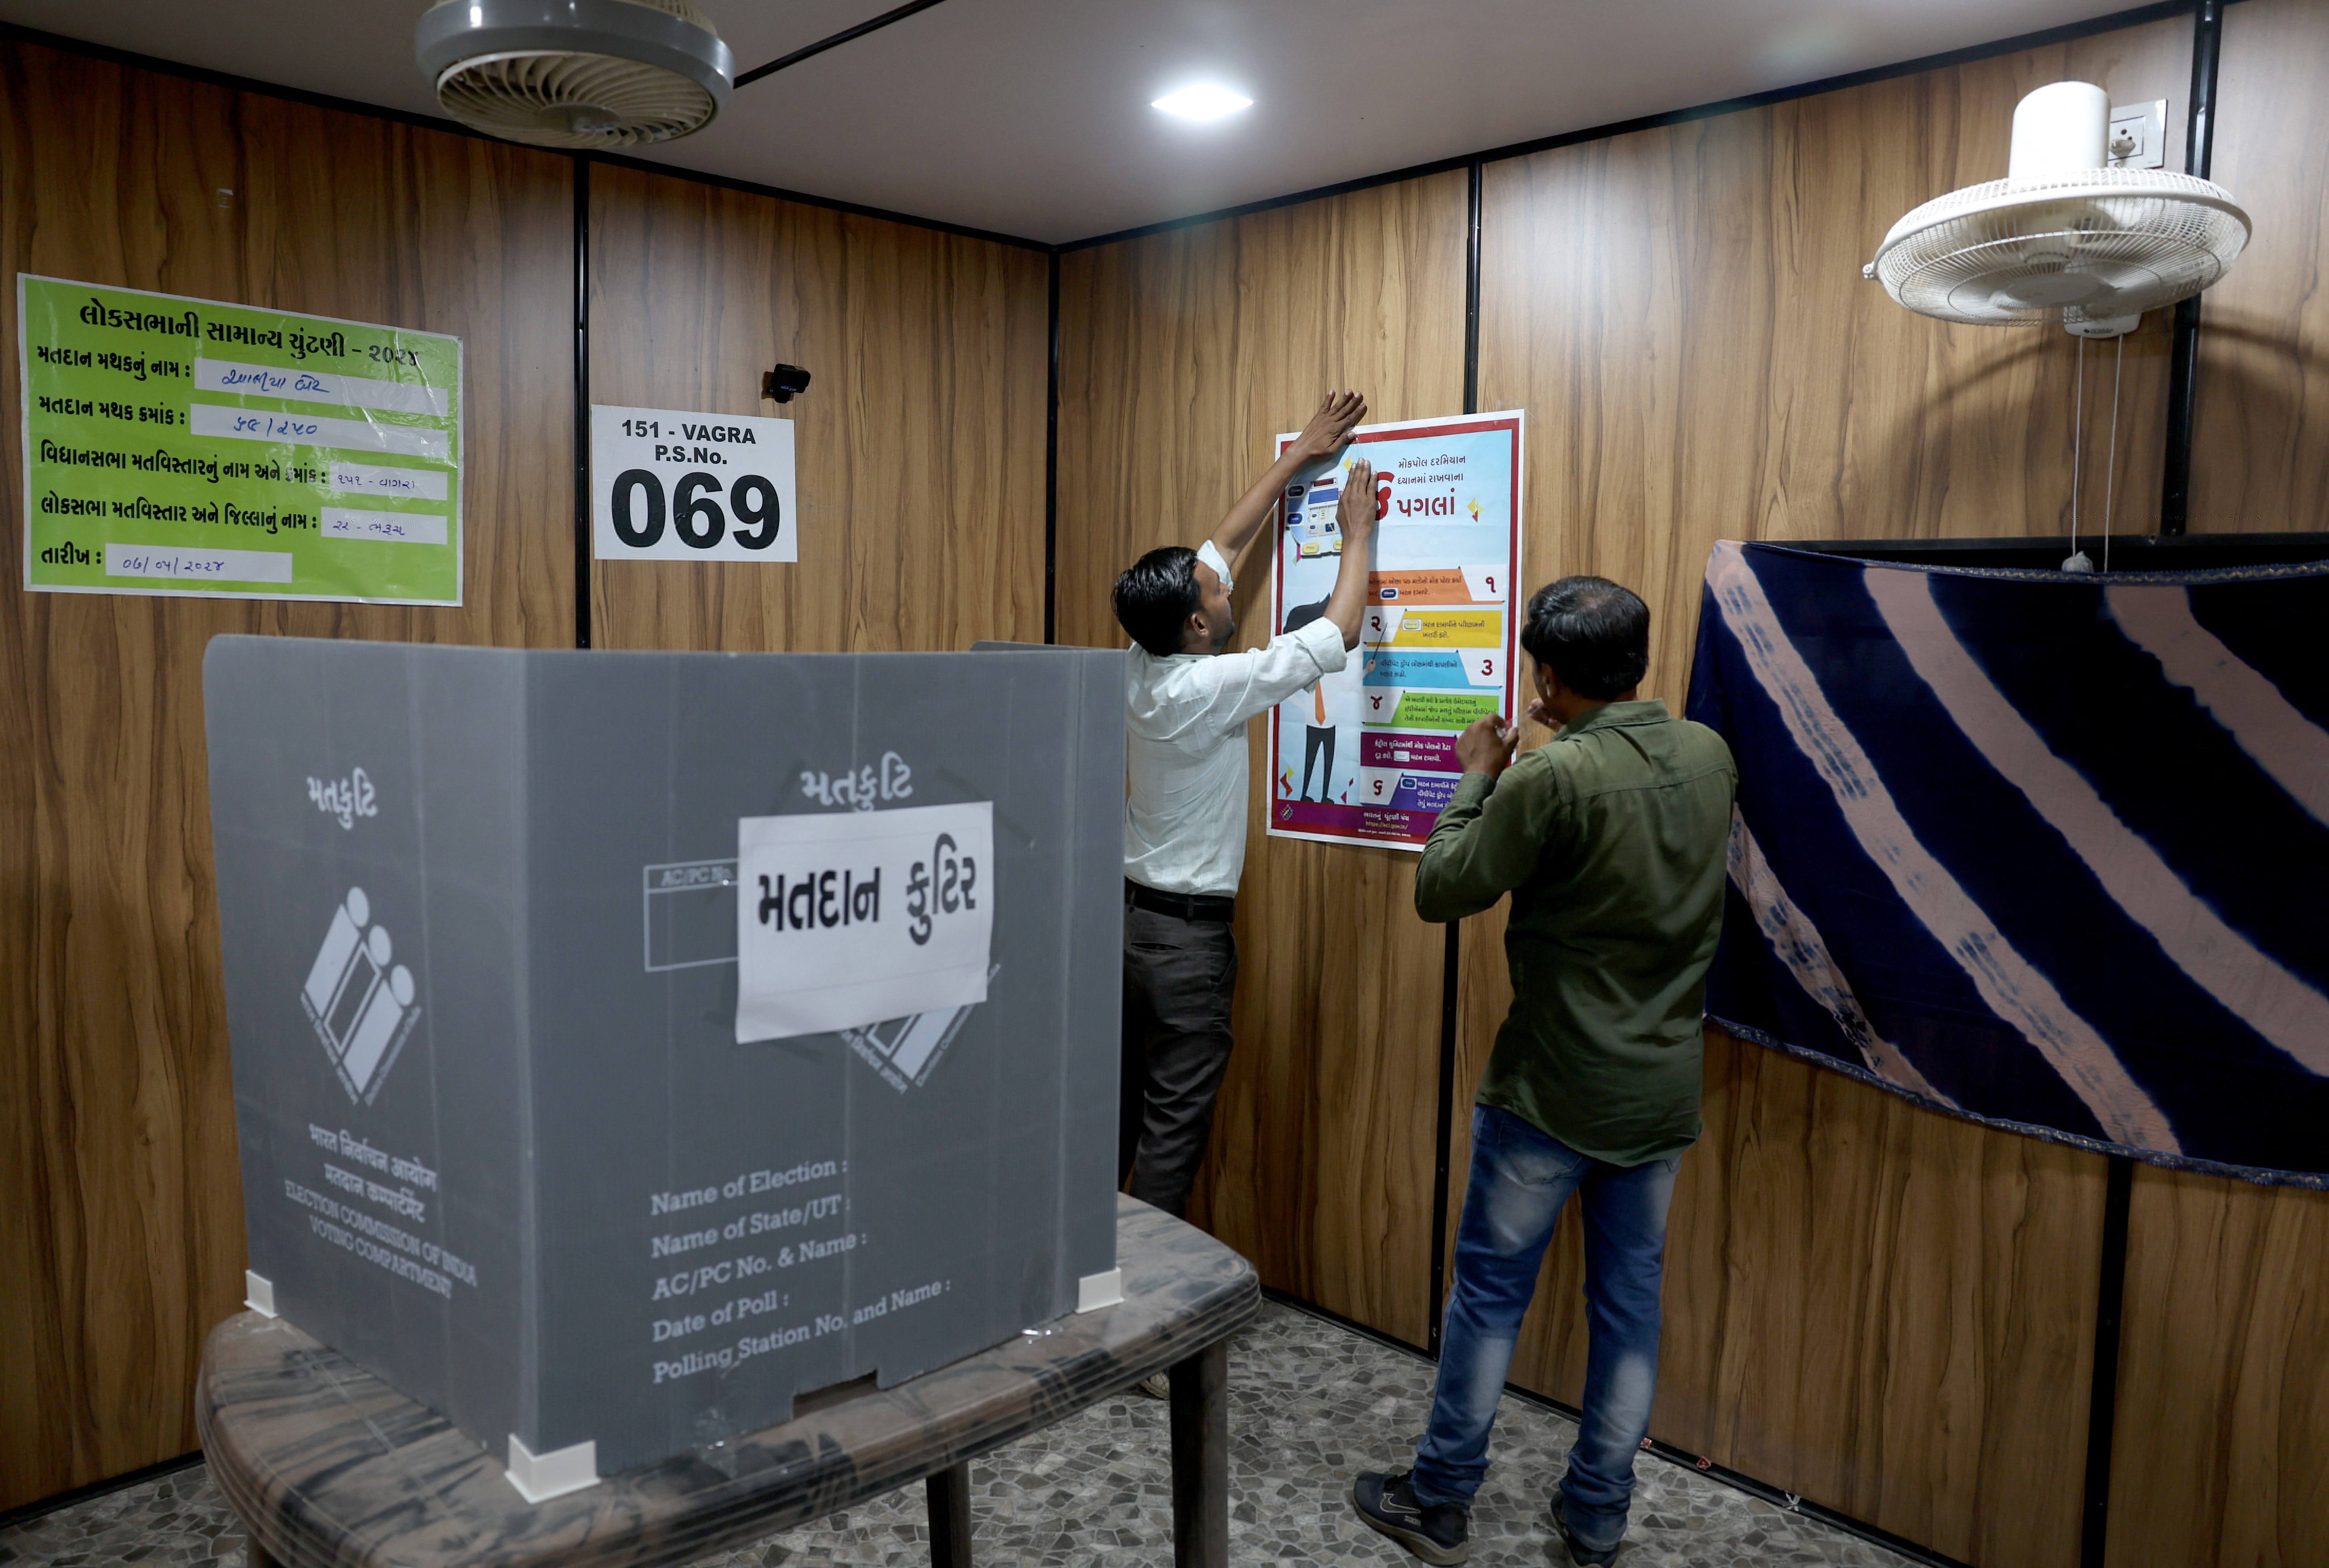 Polling officials set up a polling booth inside a shipping container, ahead of the third phase of India's general election, at Aaliya Bet Island